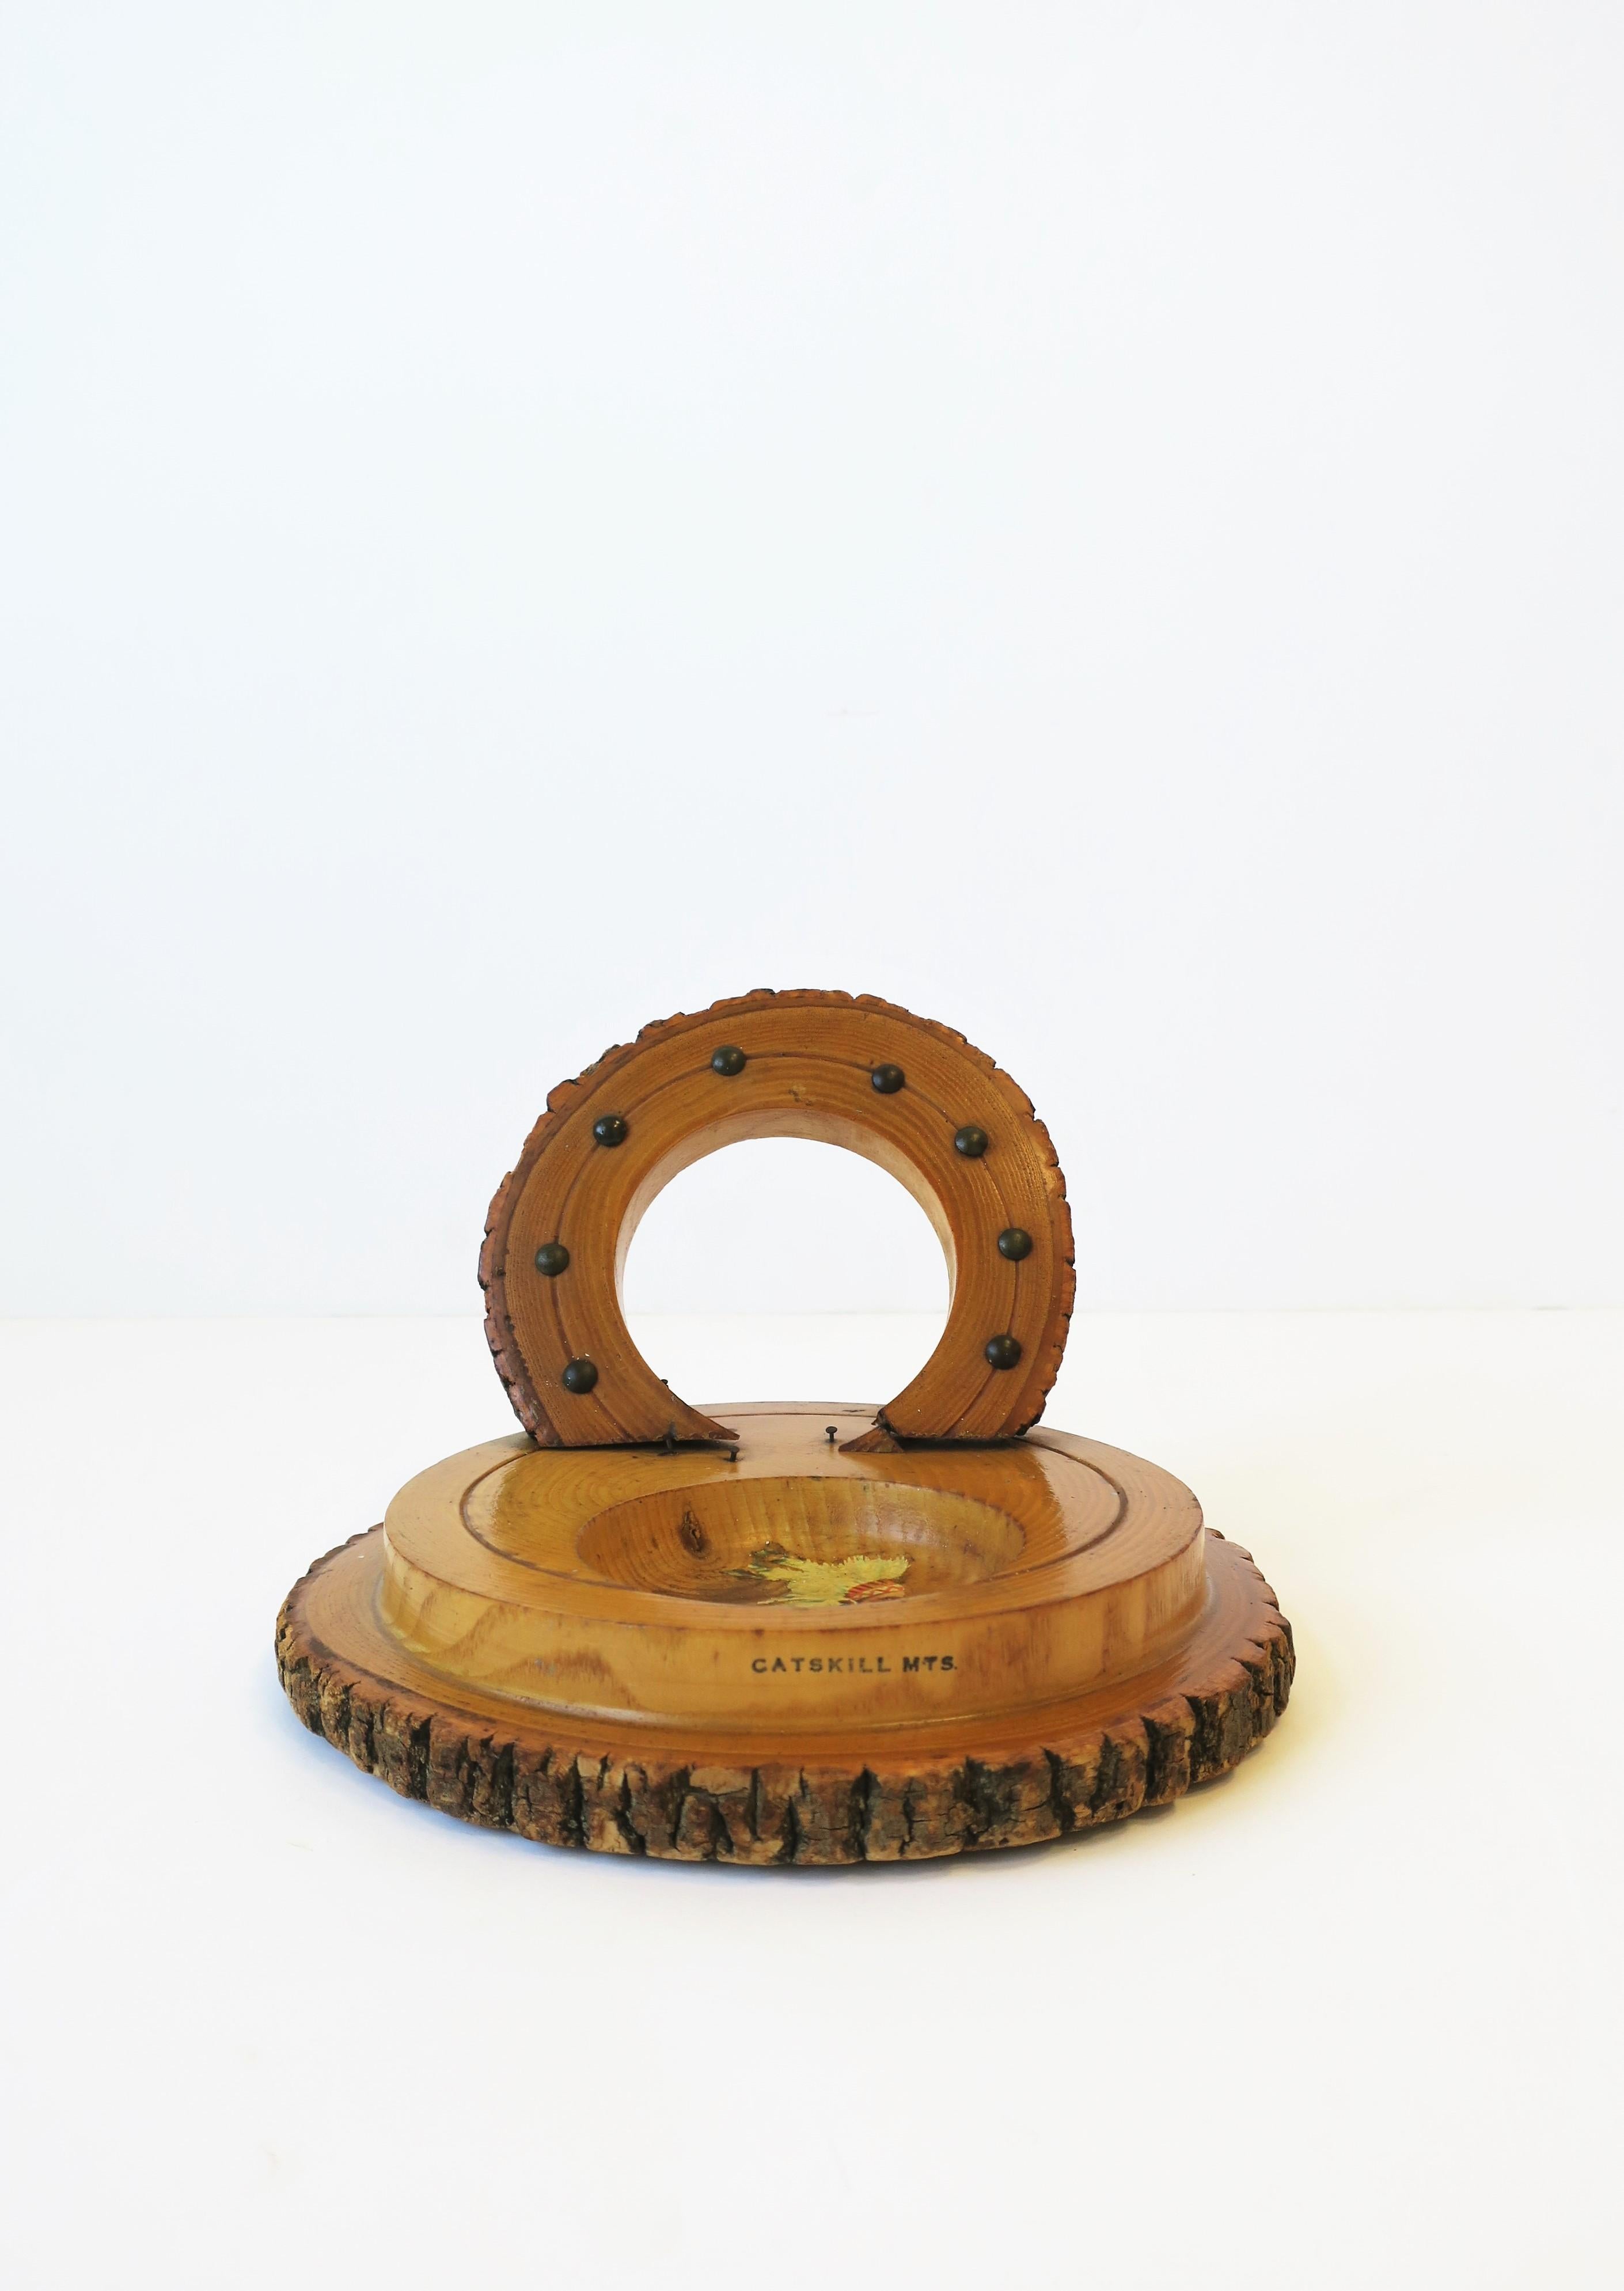 A 'Catskill Mountains' wood catch-all piece, circa mid-20th century, USA. Piece is hand carved of raw wood, varnished, with horseshoe design and metal detail, and round catchall space with Native American Indian design. Piece may work well on a desk